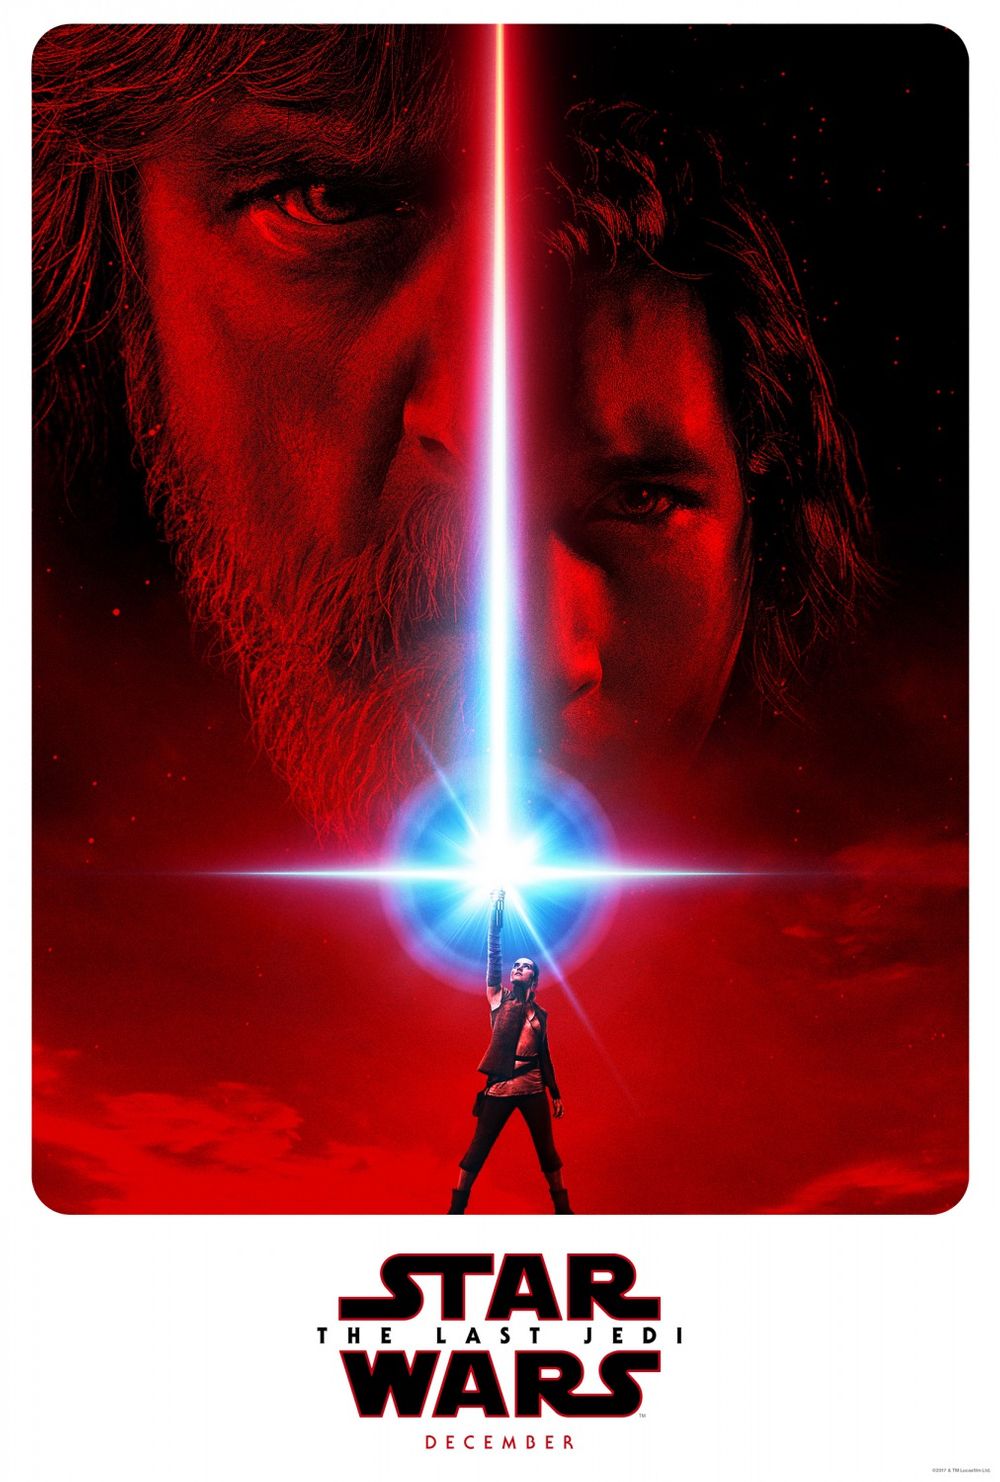 Star Wars: The Last Jedi English Movie: Wiki, Overview, Cast and Crews, Posters, Photos, Songs, Trailer, News & Videos | Star Wars: The Last Jedi Movie Details | Cinema Profile